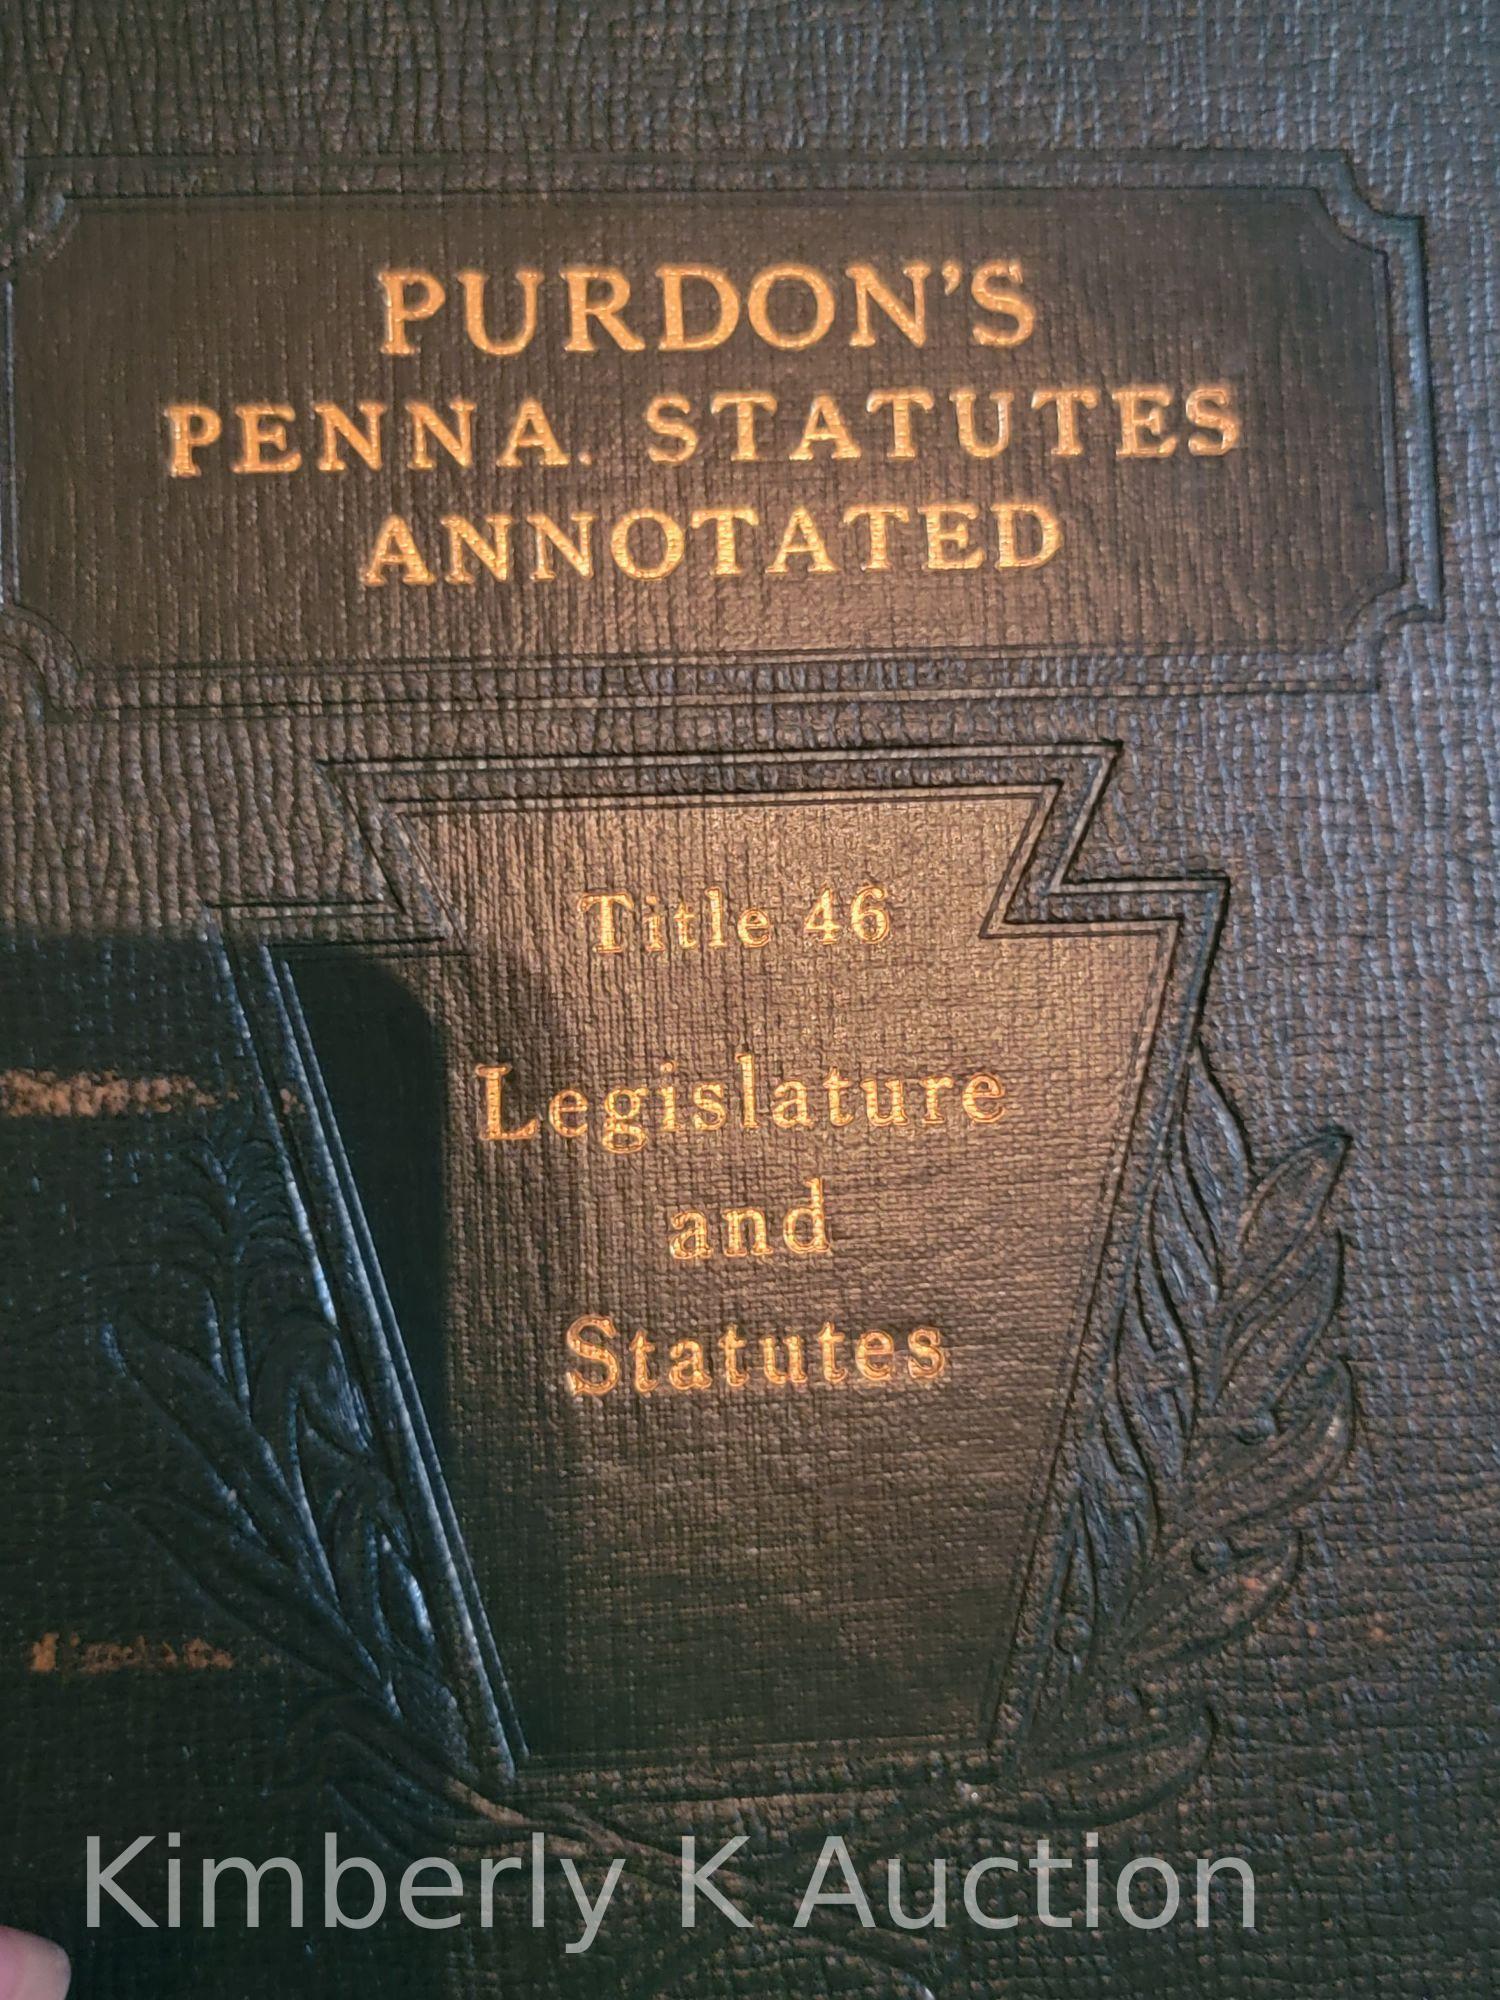 Purdon's Penna. Statues Annotated, Approx. 37 Volumes